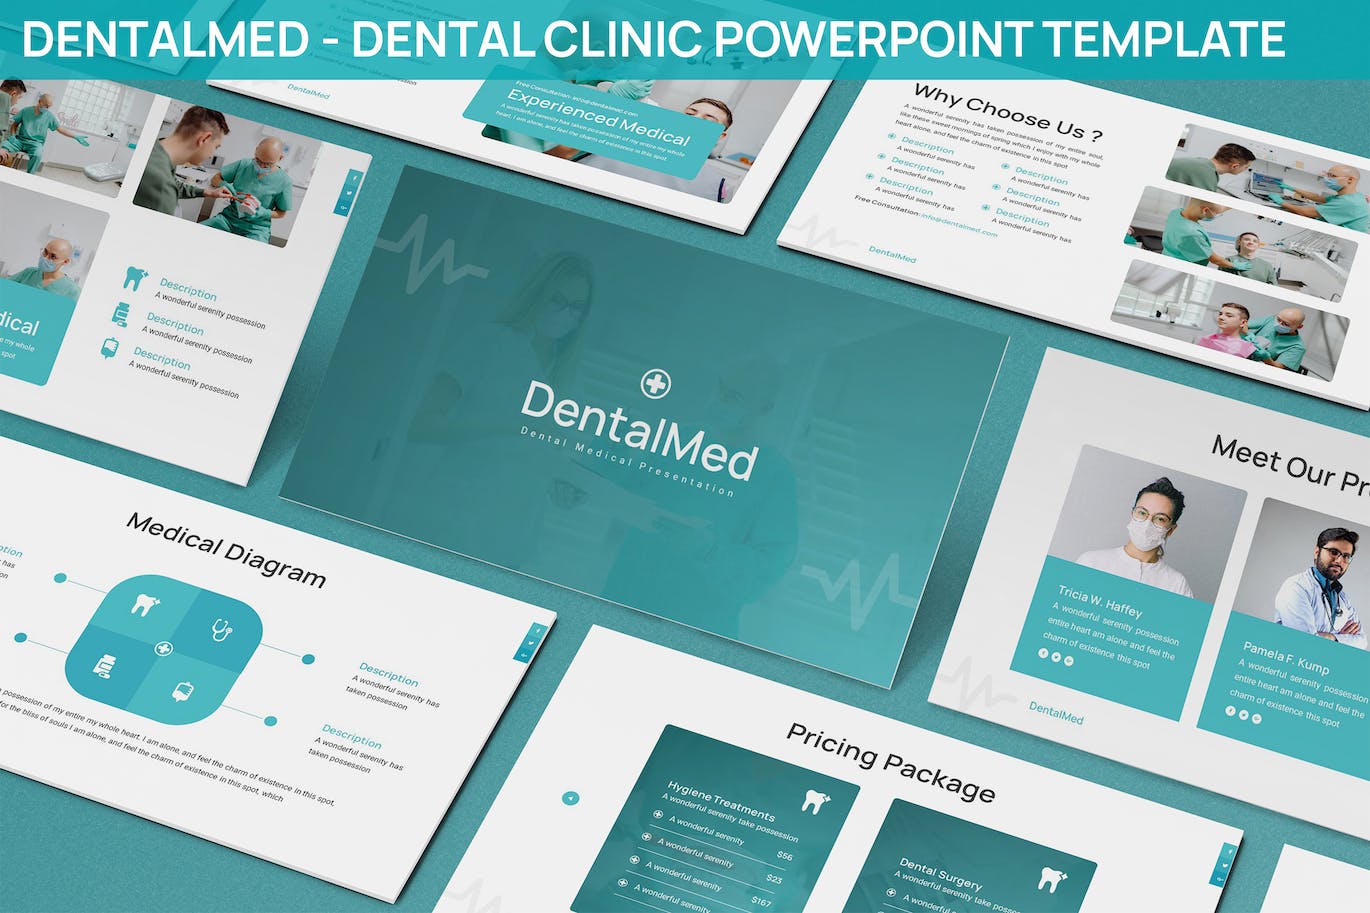 Pack of images of colorful presentation template slides on the topic of dentistry.